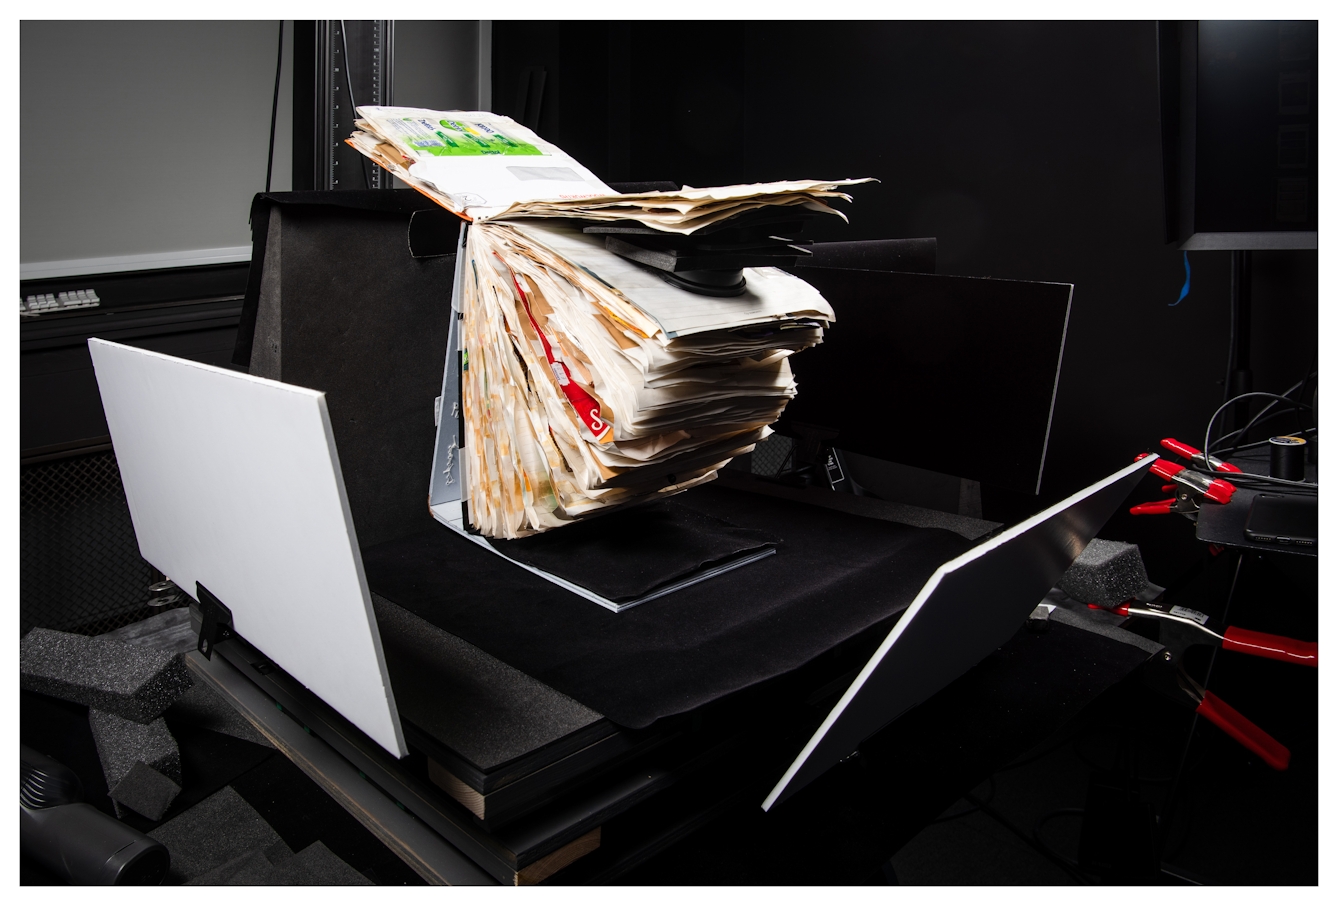 Photograph of a photographic studio flat copy set up, with a large scrapbook on a specialised support, pages open ready to be photographed. Surrounding the scrapbook are black 'flags' and a black background. Around the edge a computer display and red clips are just visible.